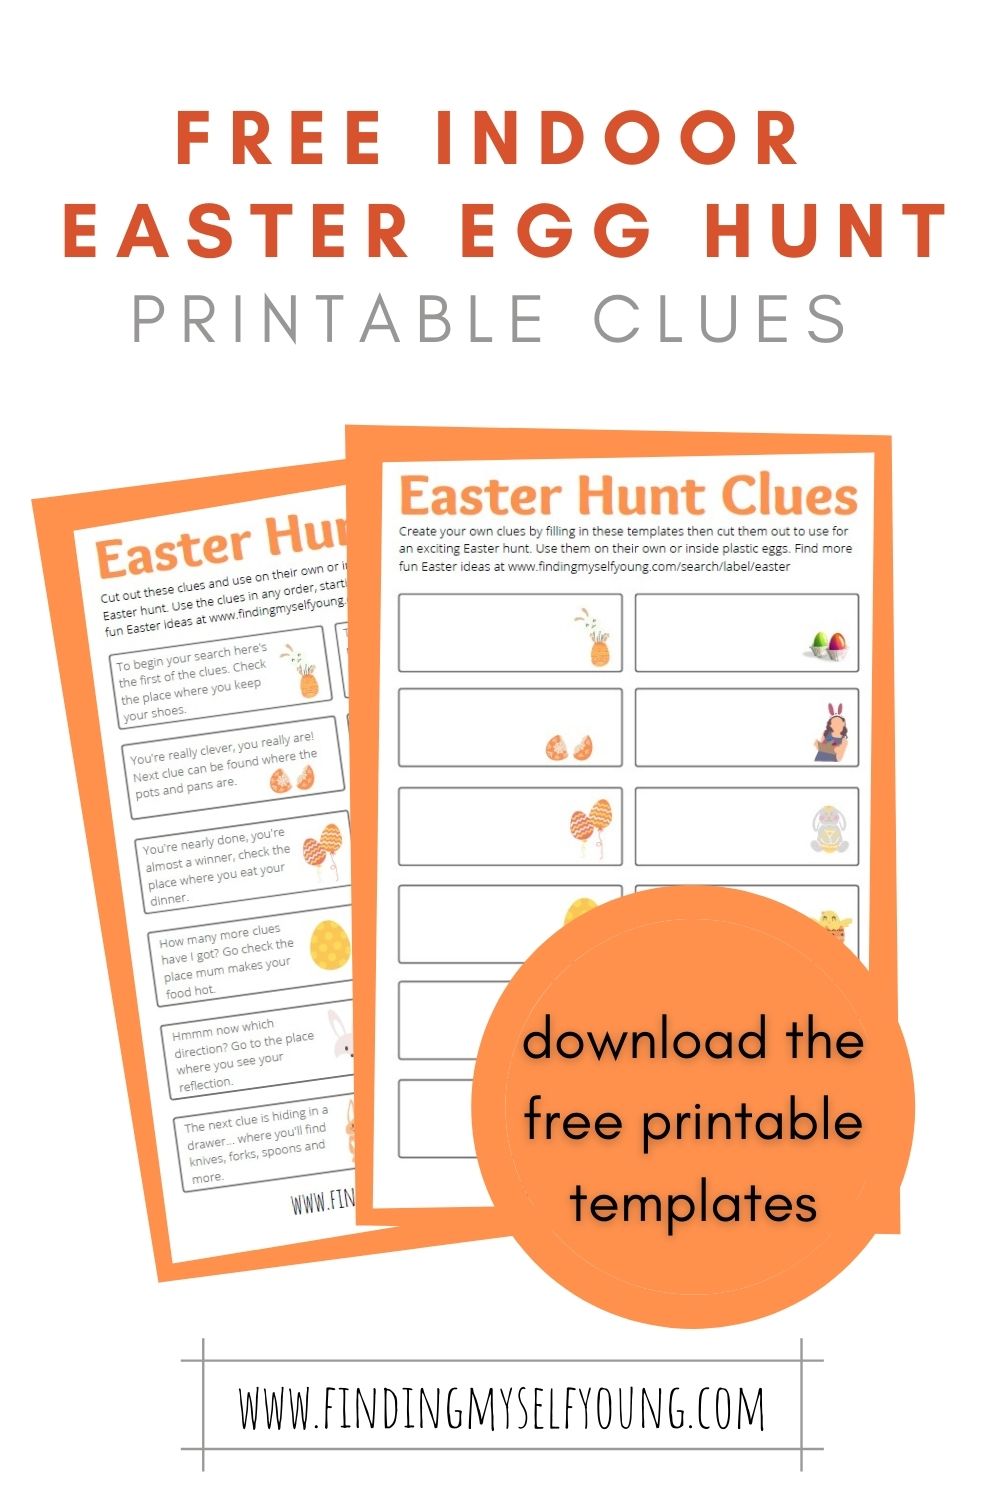 free printable easter egg hunt clues from finding myself young